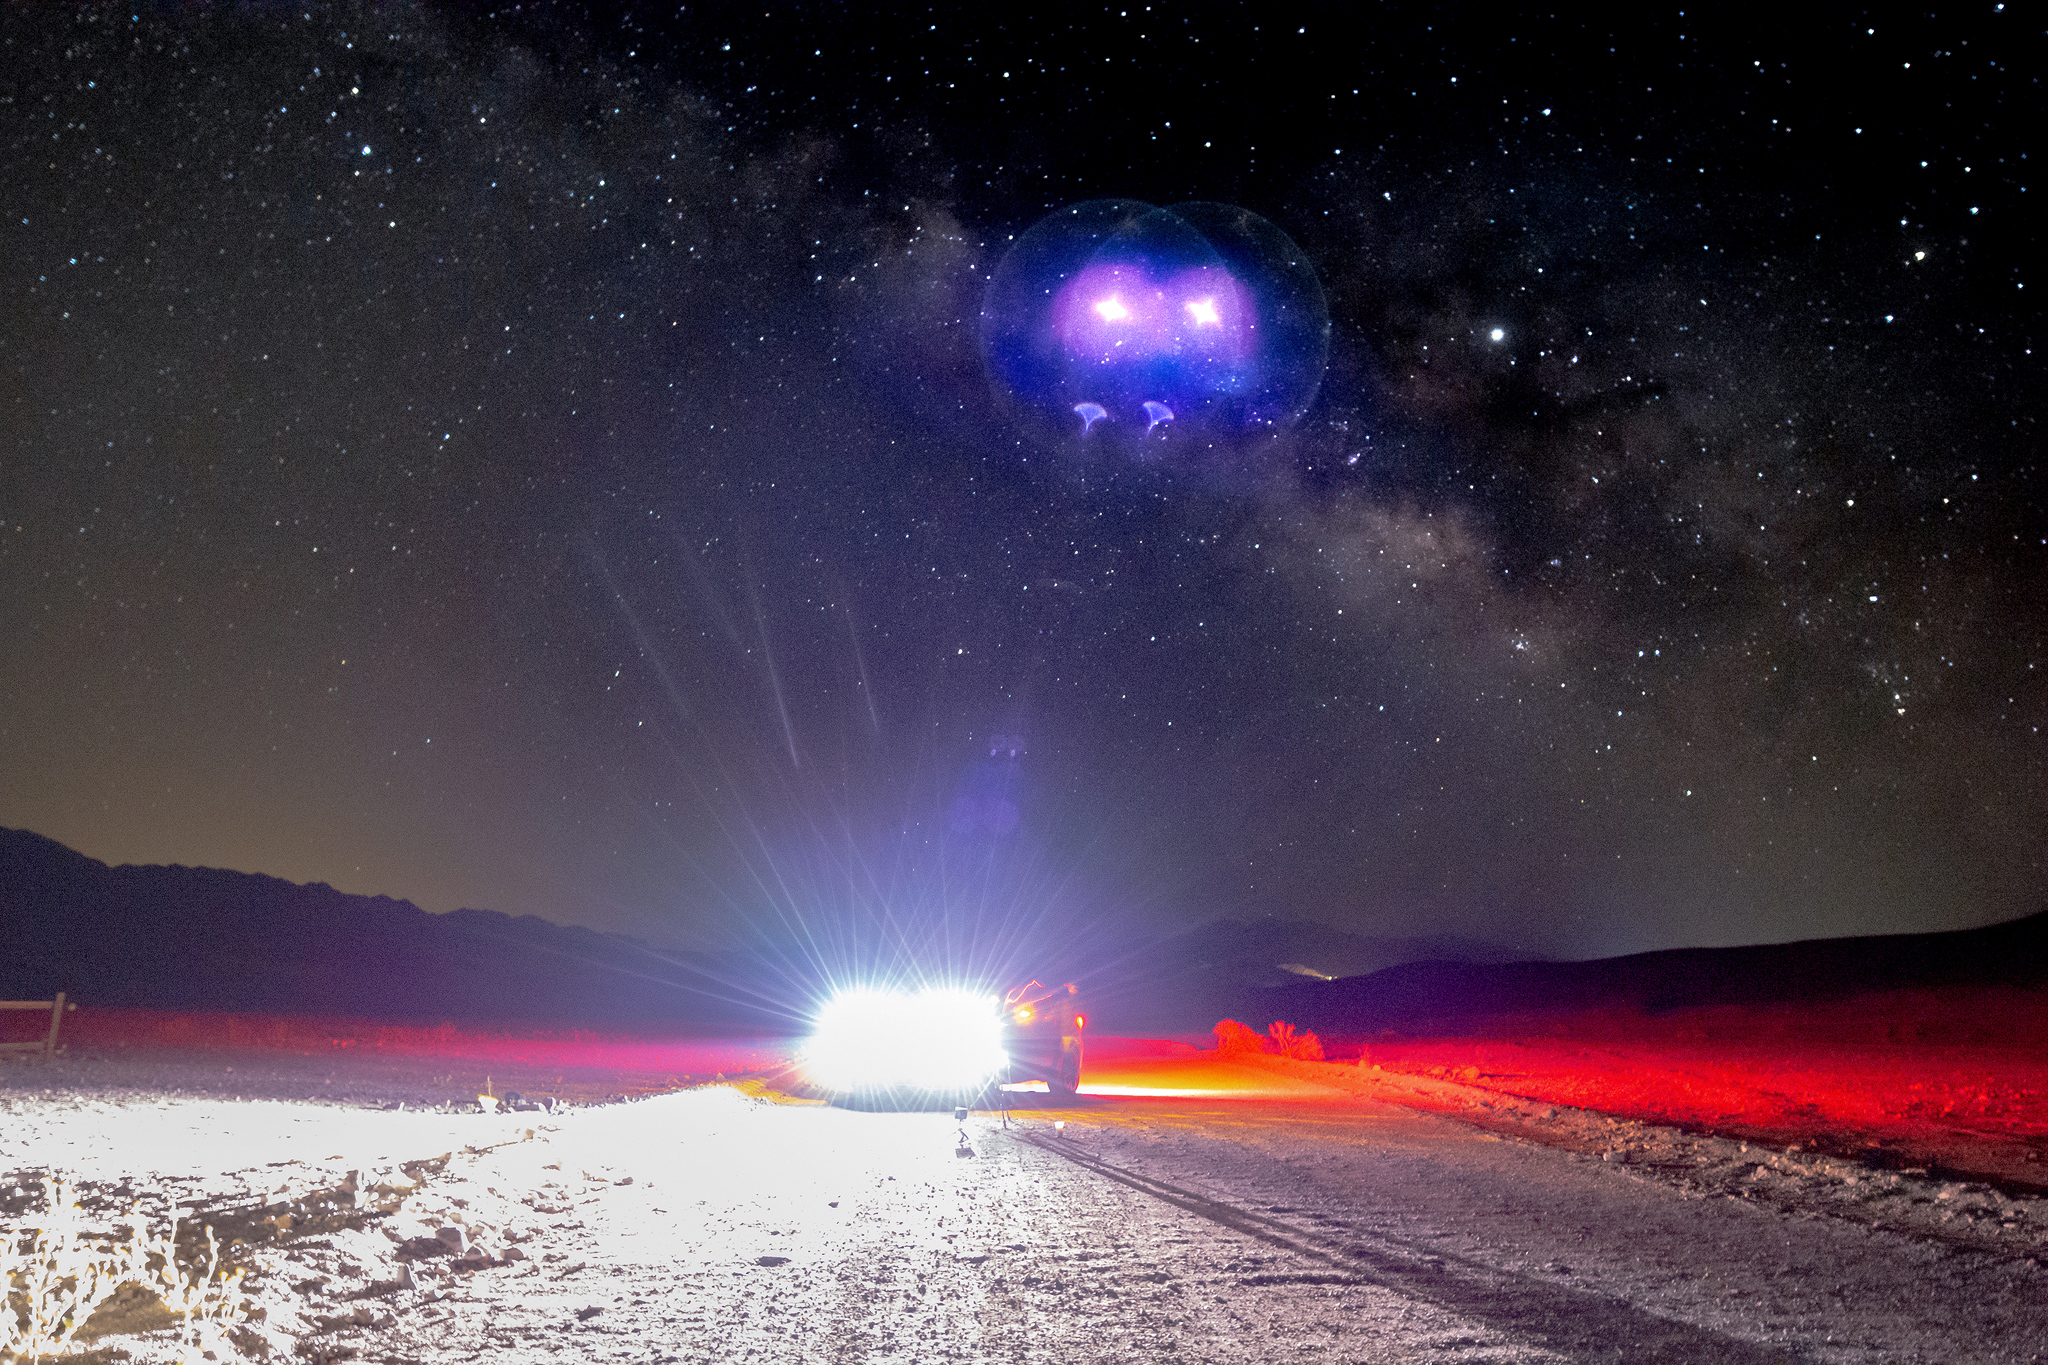 The Milky Way Rises Over a Jeep with its headlights on